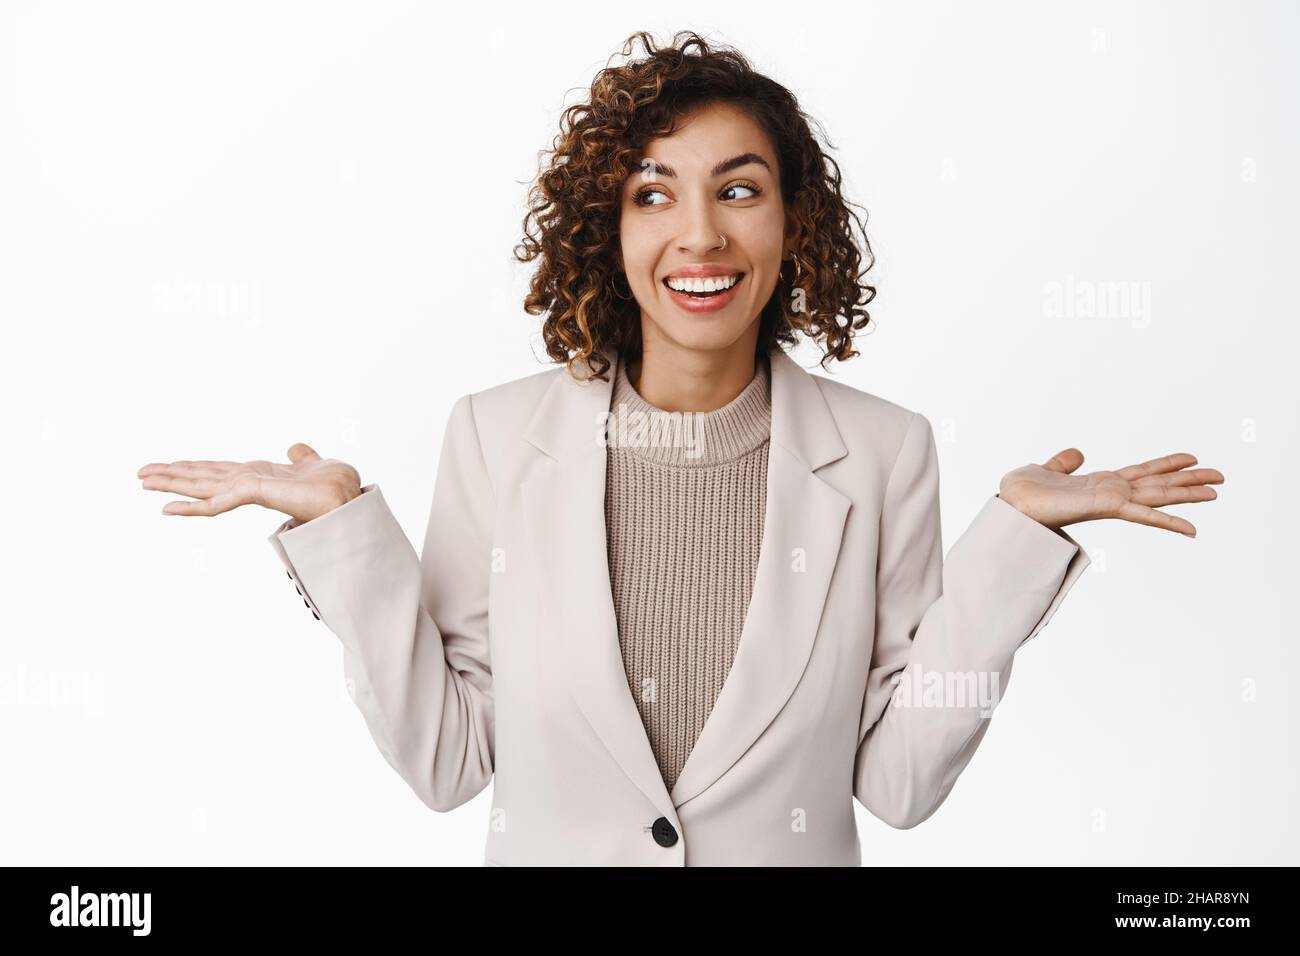 Image of cute corporate woman, office lady shrugging shoulders and smiling, looking unaware, clueless, dont care, standing in suit over white Stock Photo